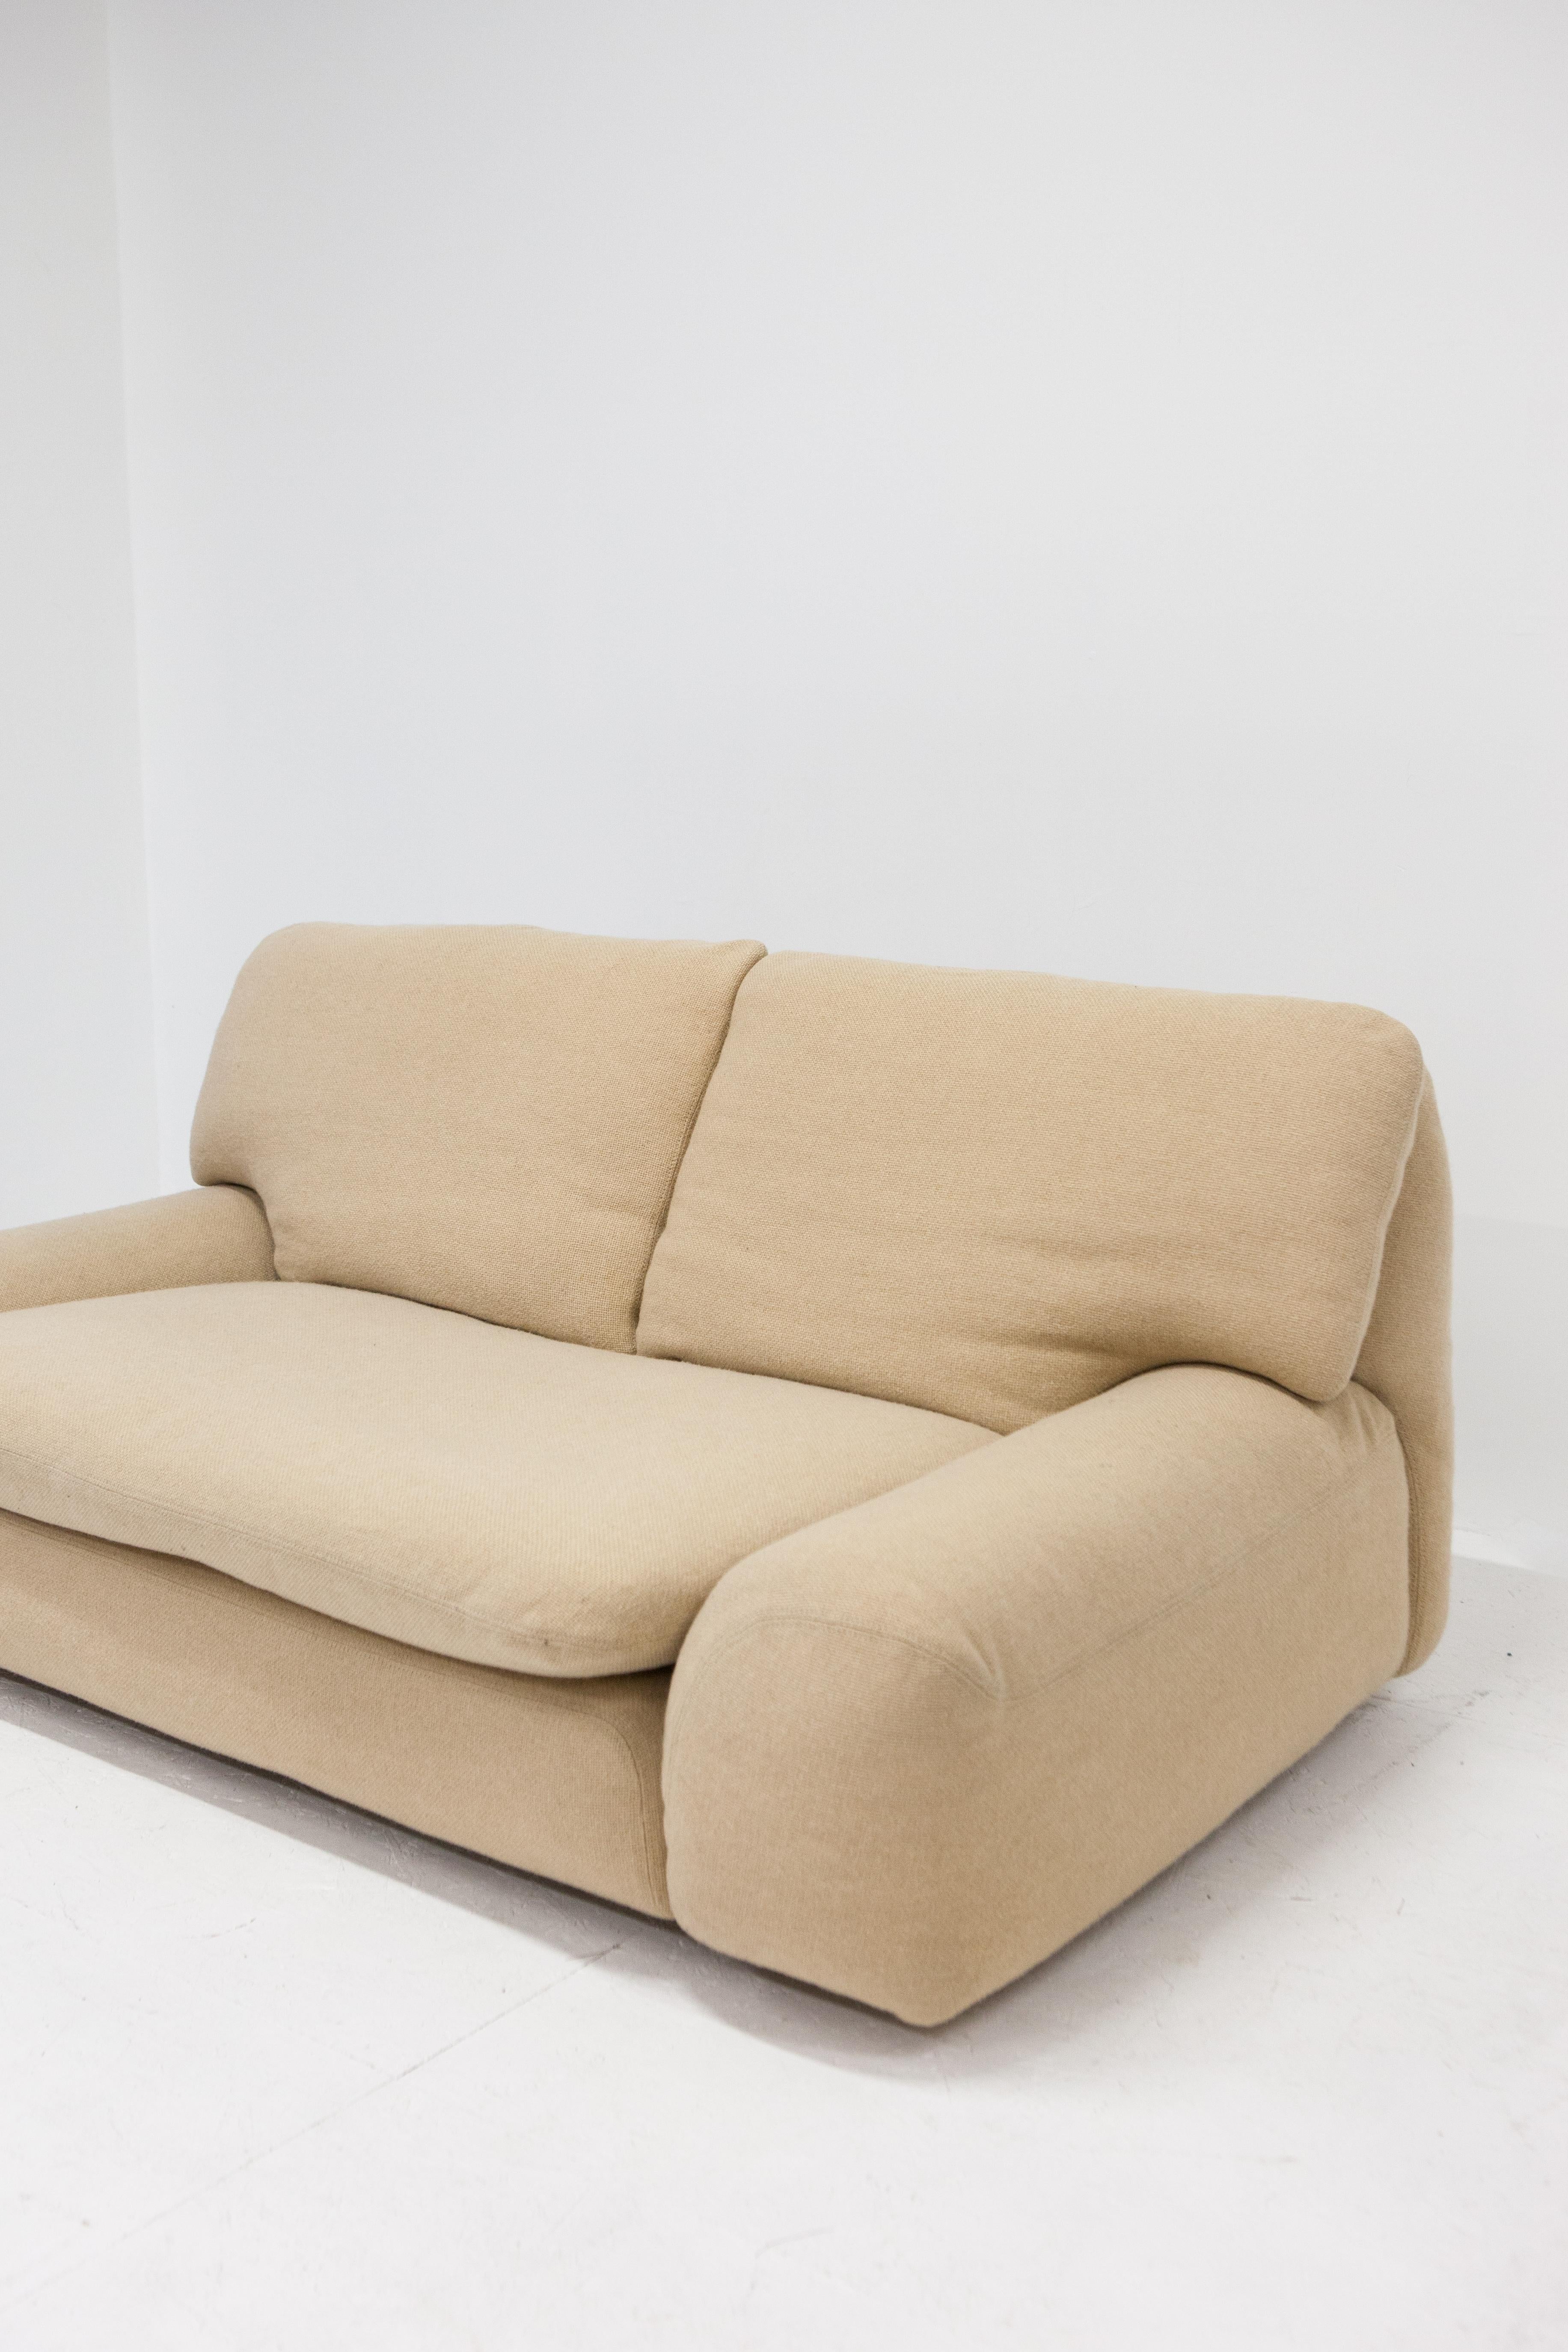 The Bengodi sofa is a rare design by one of our favourite Italian designers, Cini Boeri. It is powerful in its simplicity, being composed of clear, solid shapes. Our Bengodi sofa is upholstered in a pretty beige wool fabric which is still in good